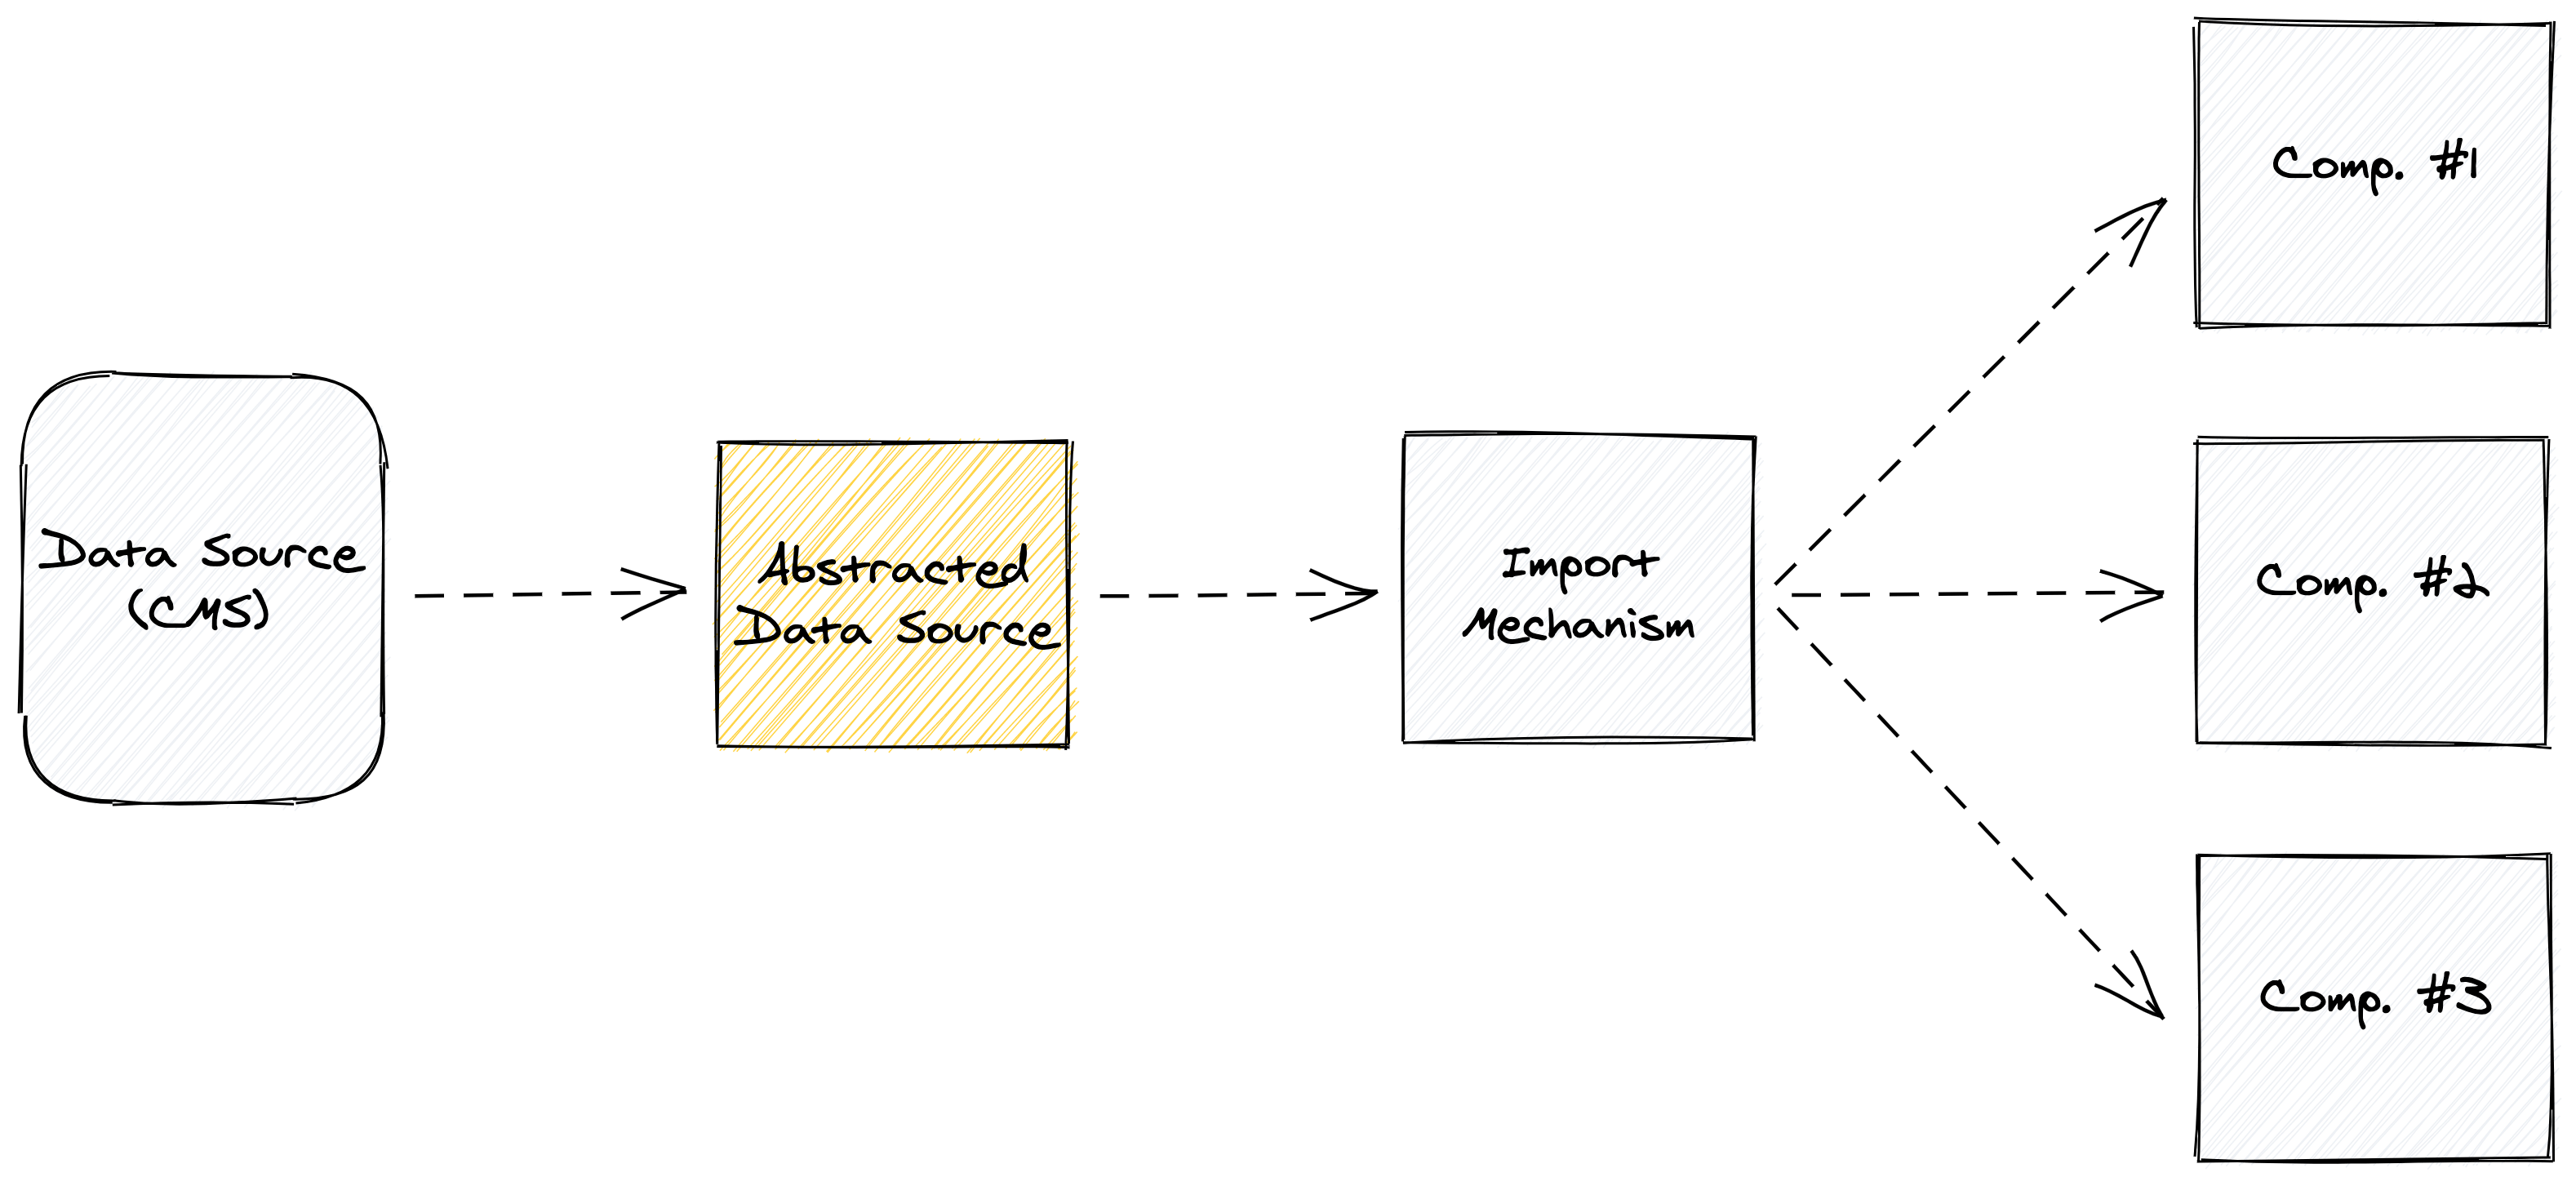 Another illustration, this time where the yellow box is the abstracted data source, which points to a white box labeled import mechanism, which then points to the same three white squares representing components that are outlined in the previous illustration.